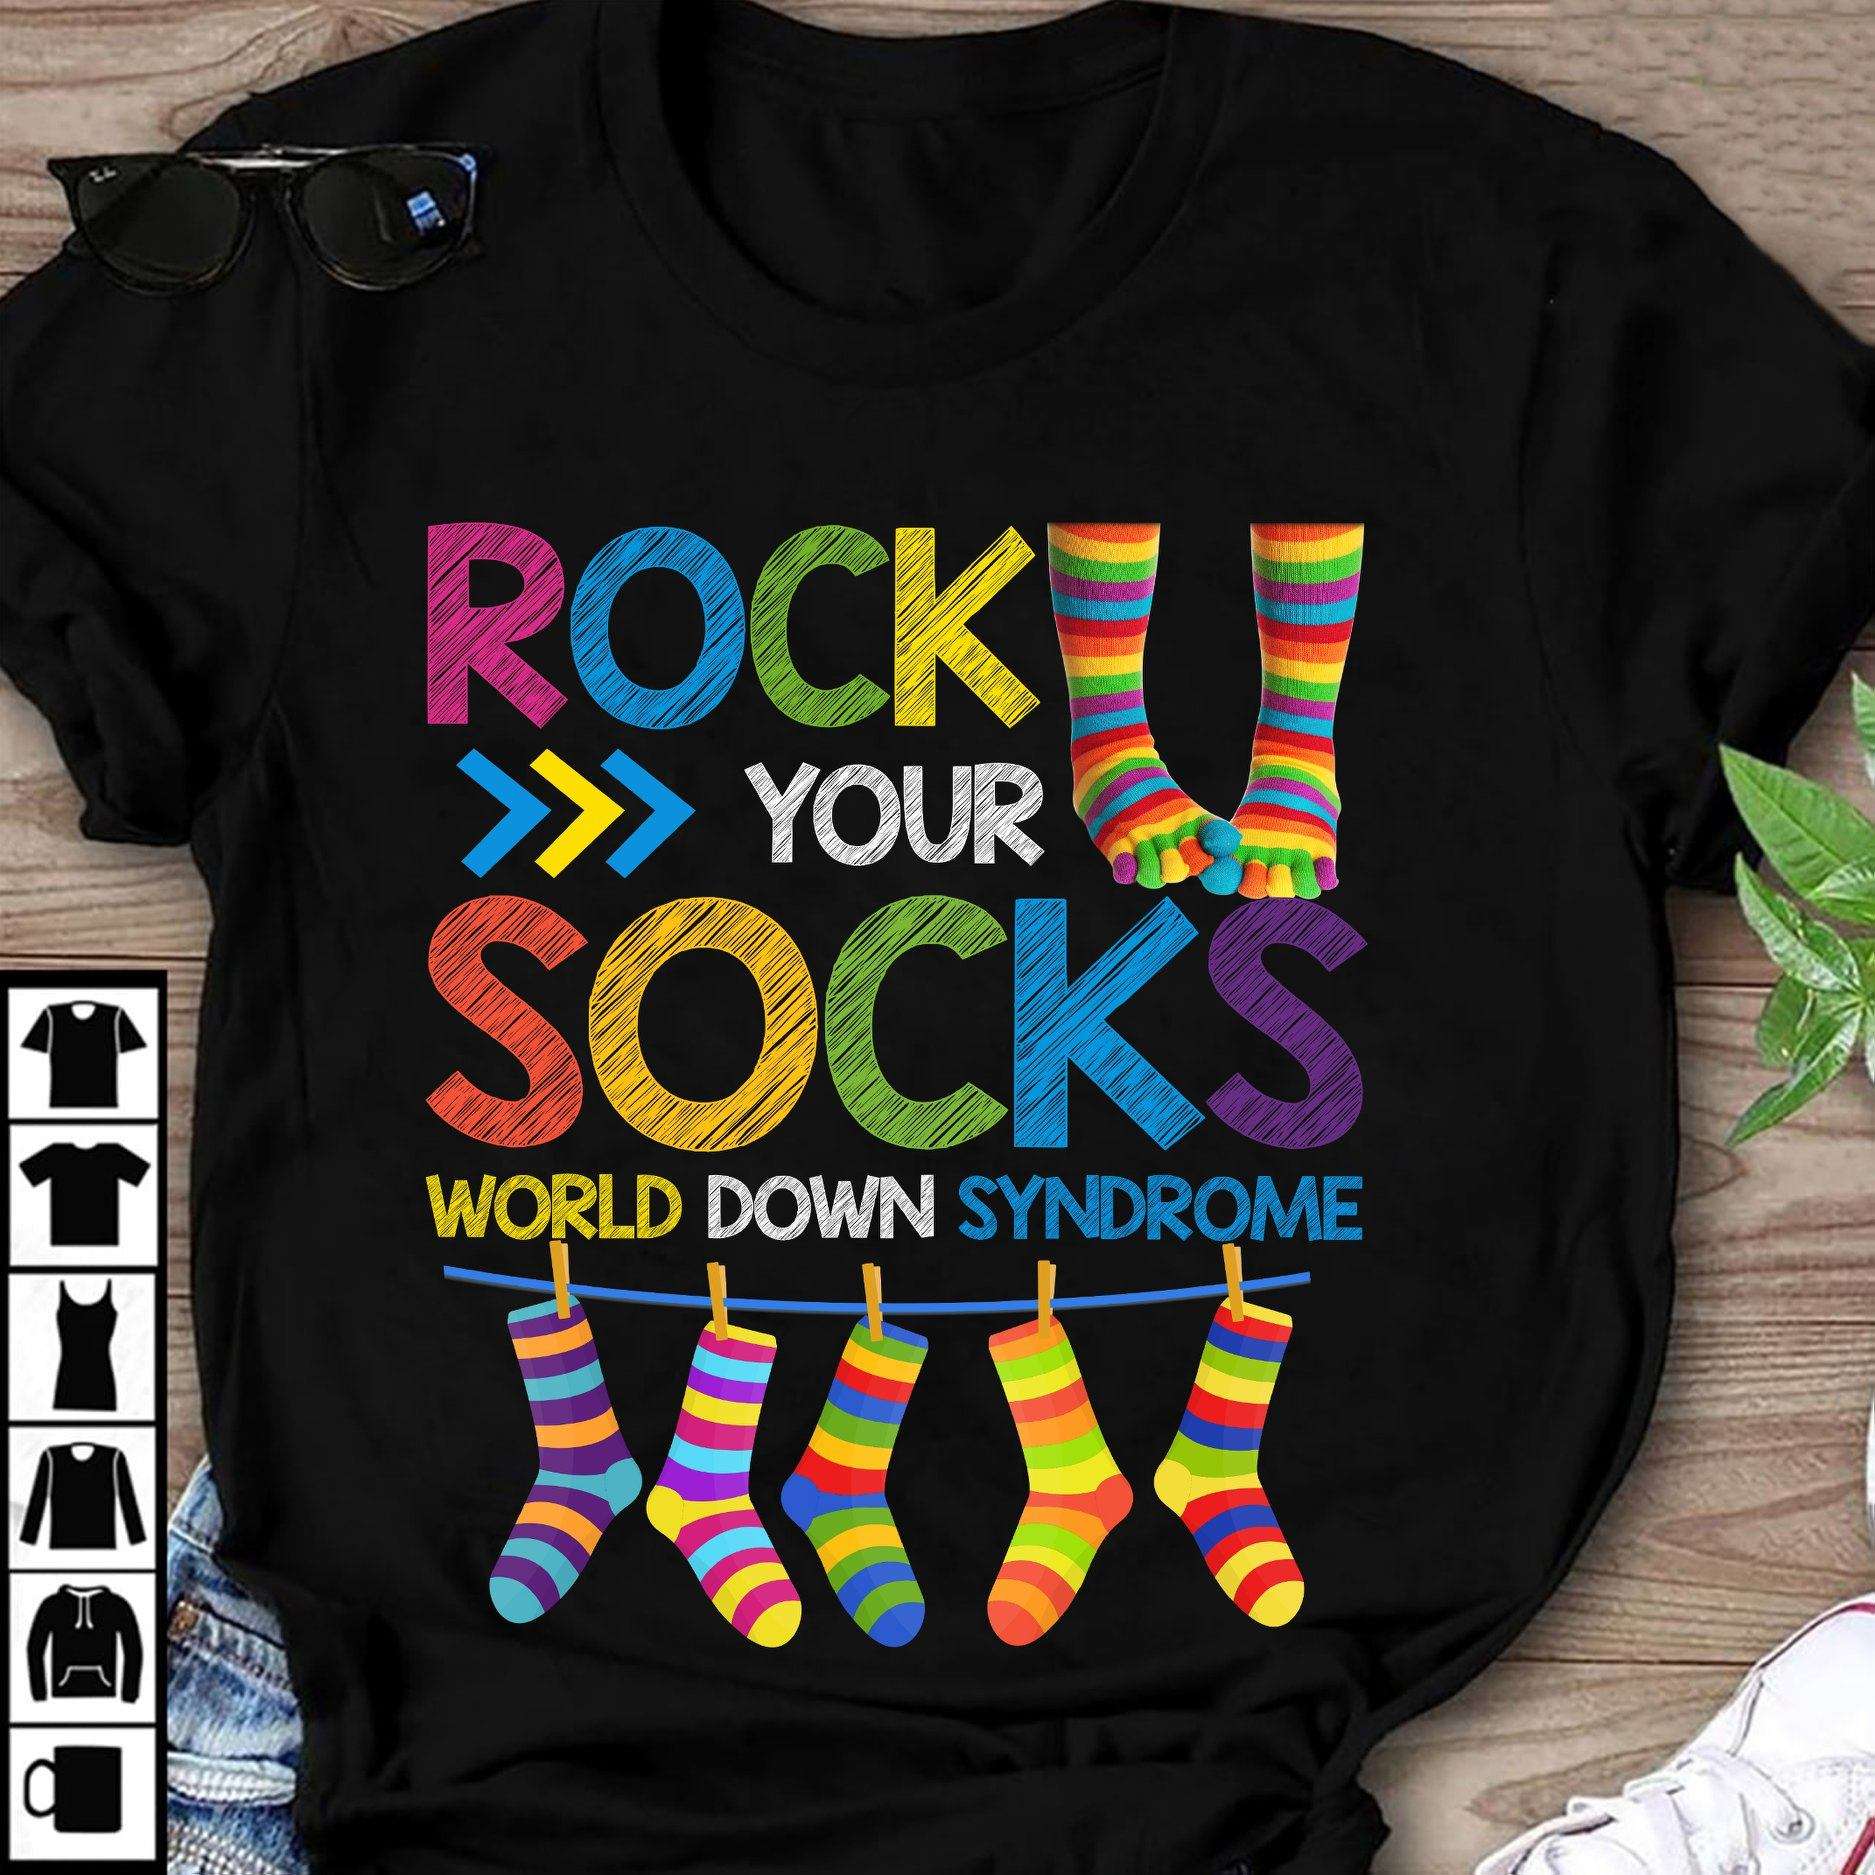 Rock your socks, world down syndrome - Down Syndrome Awareness